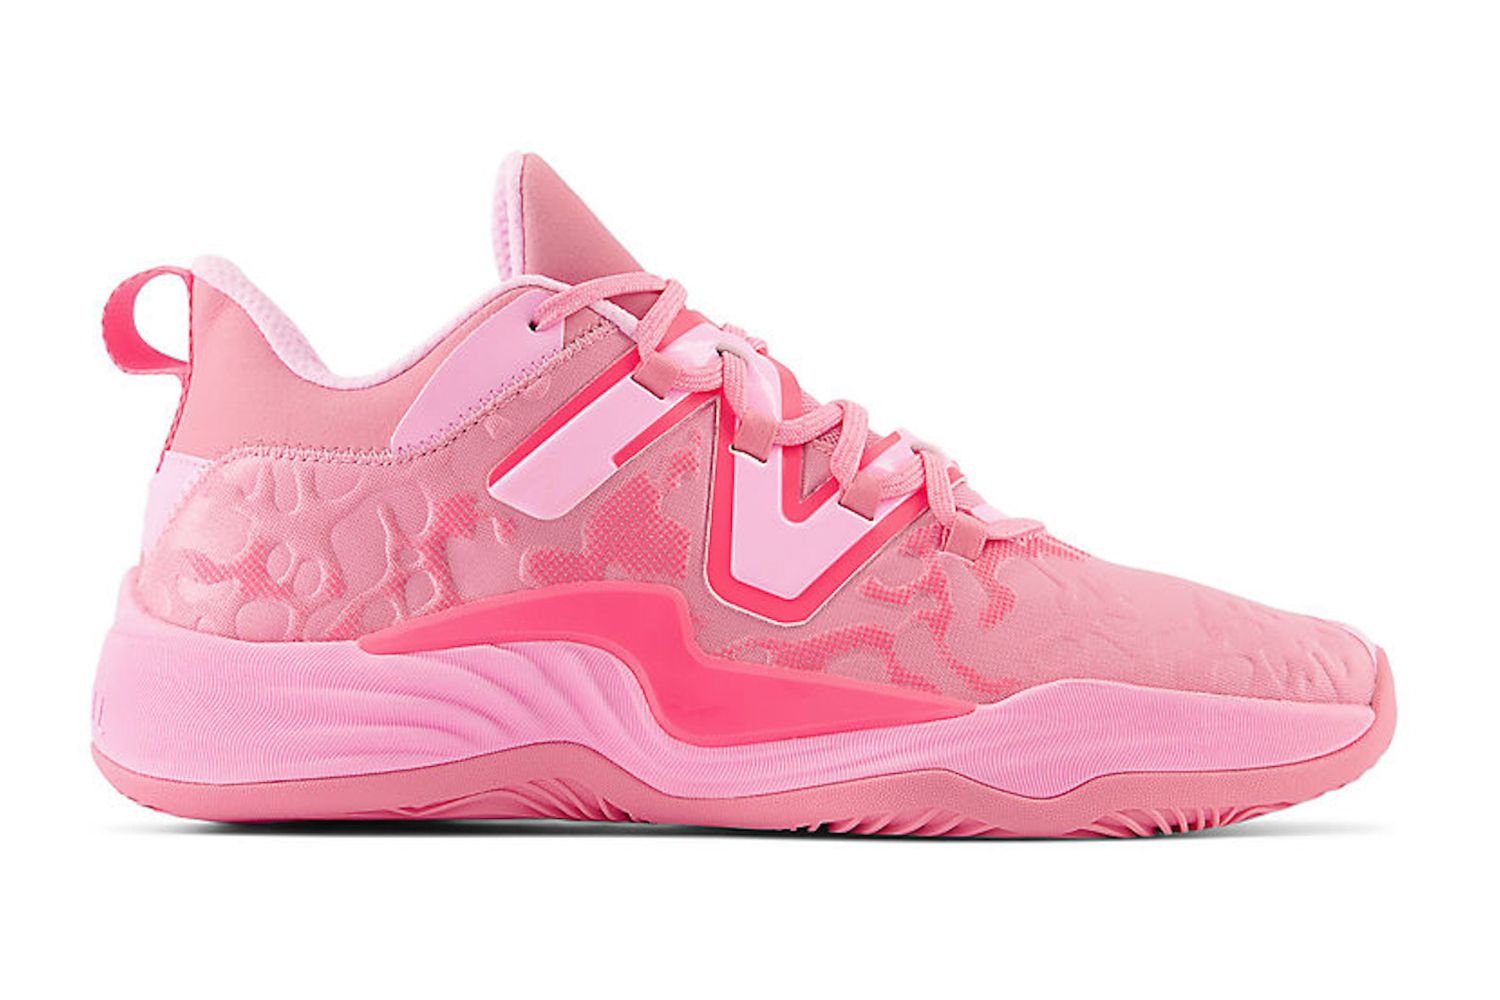 Pink Basketball Shoes - Facts.net